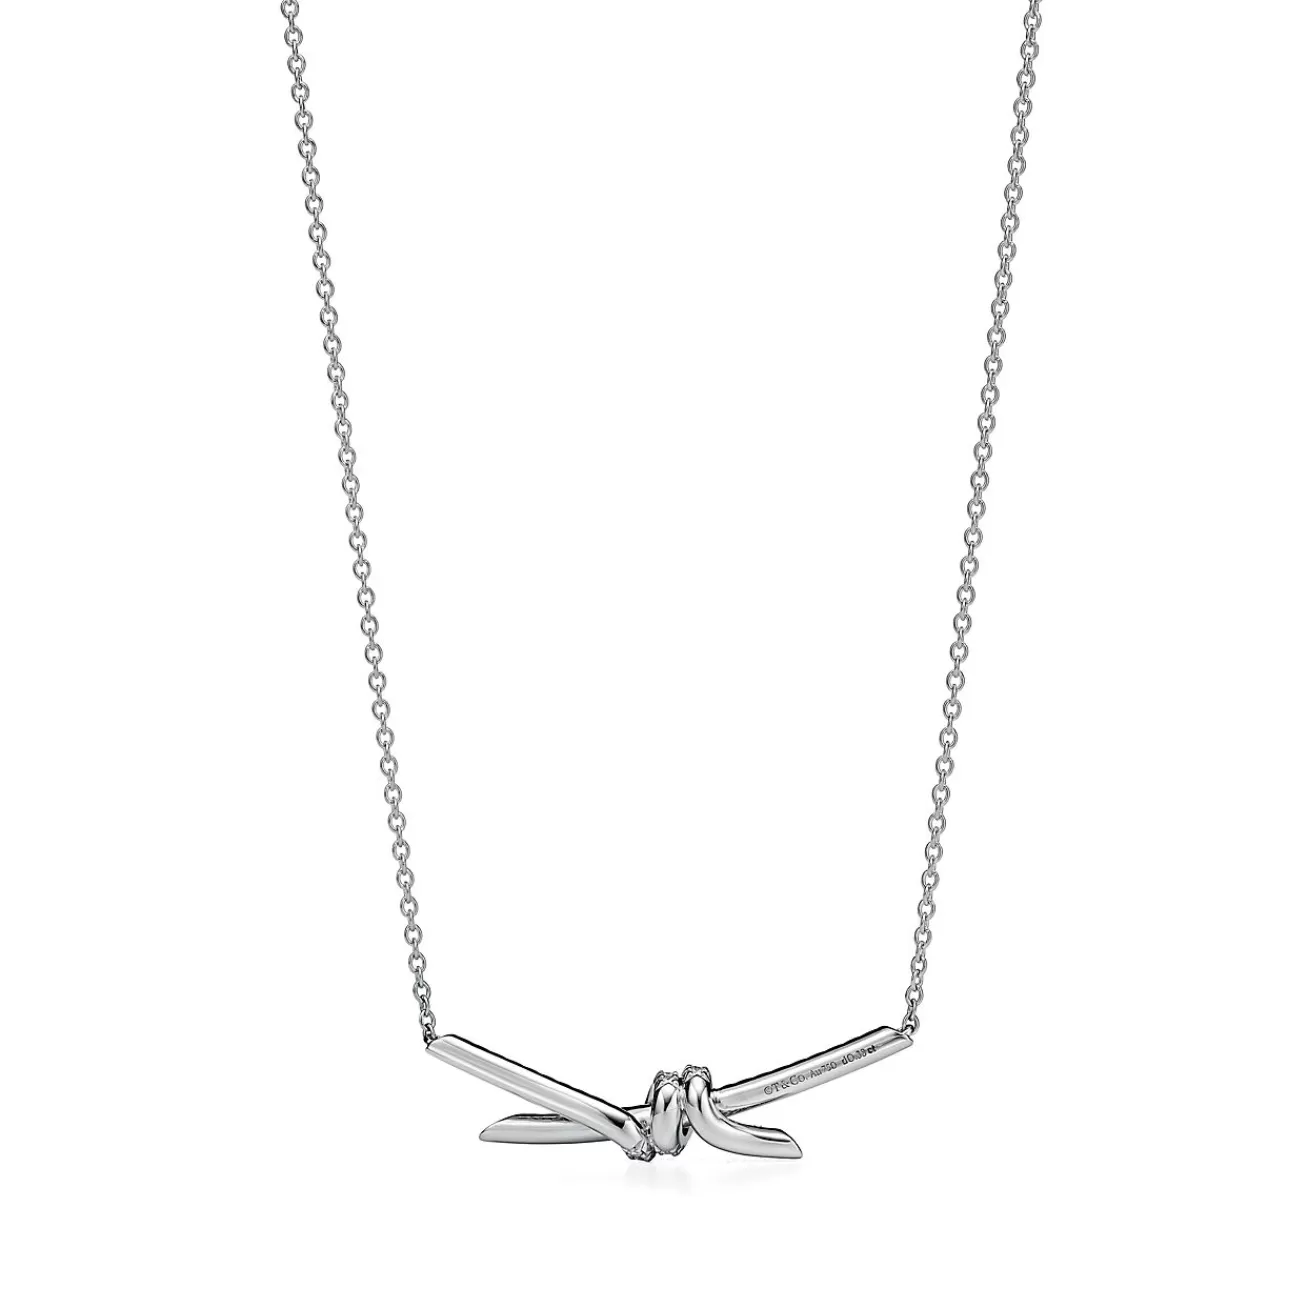 Tiffany & Co. Tiffany Knot Pendant in White Gold with Diamonds | ^ Necklaces & Pendants | Gifts for Her